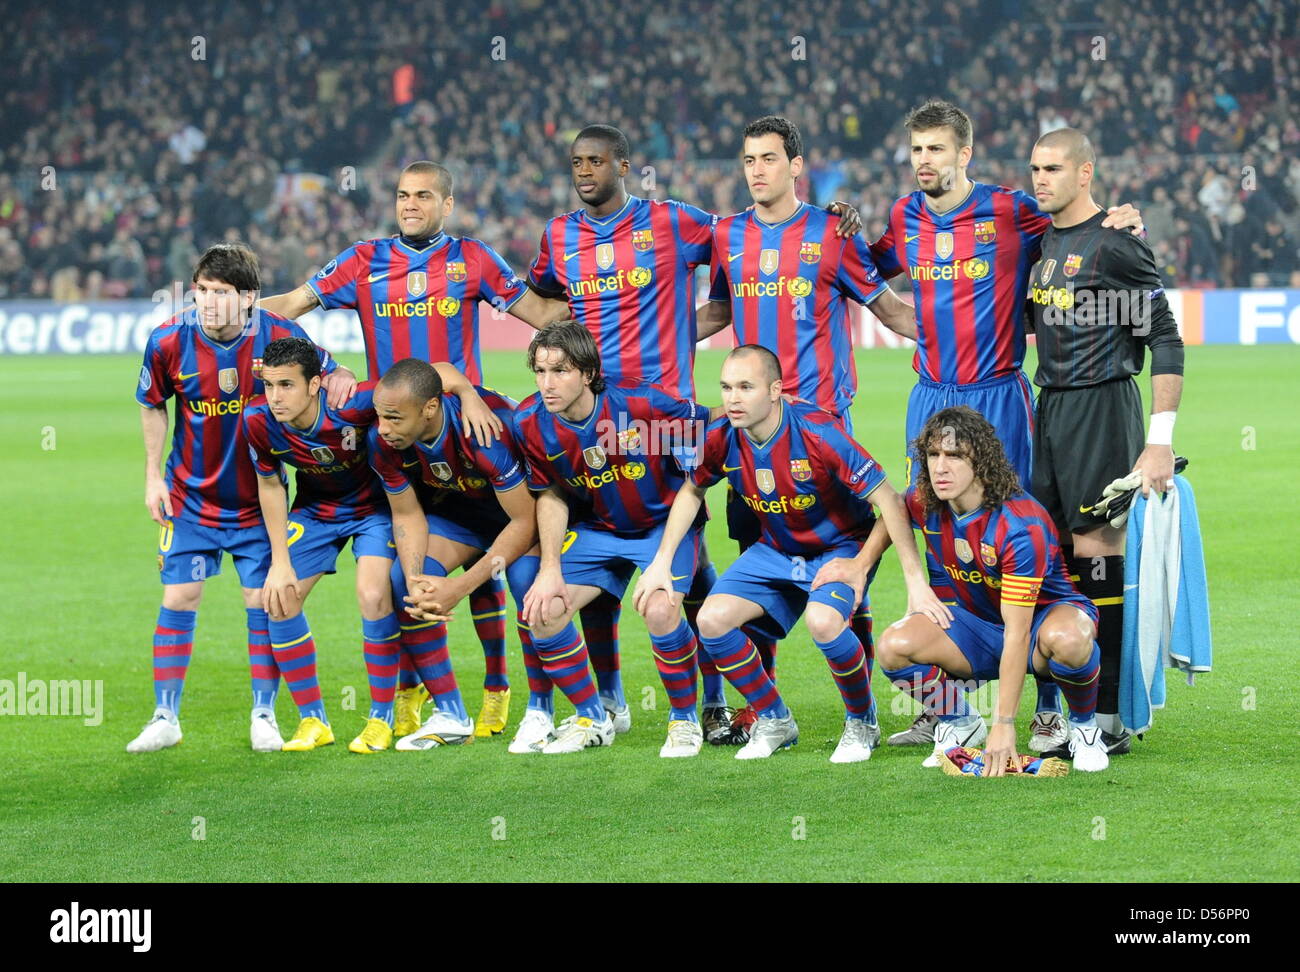 Barcelona's starting line-up before UEFA Champions League round of 16 match FC Barcelona vs VfB Stuttgart at Camp Nou stadium of Barcelona, Spain, 17 March 2010. (top row L-R) Dani Alves, Yaya Toure, Sergi Busquets, Gerard Pique und Torwart Victor Valdes. (Bottom row L-r) Lionel Messi, Pedro, Thierry Henry, Maxwell, Andres Iniesta and Puyol. Barcelona thrashed Stuttgart 4-0 in the  Stock Photo